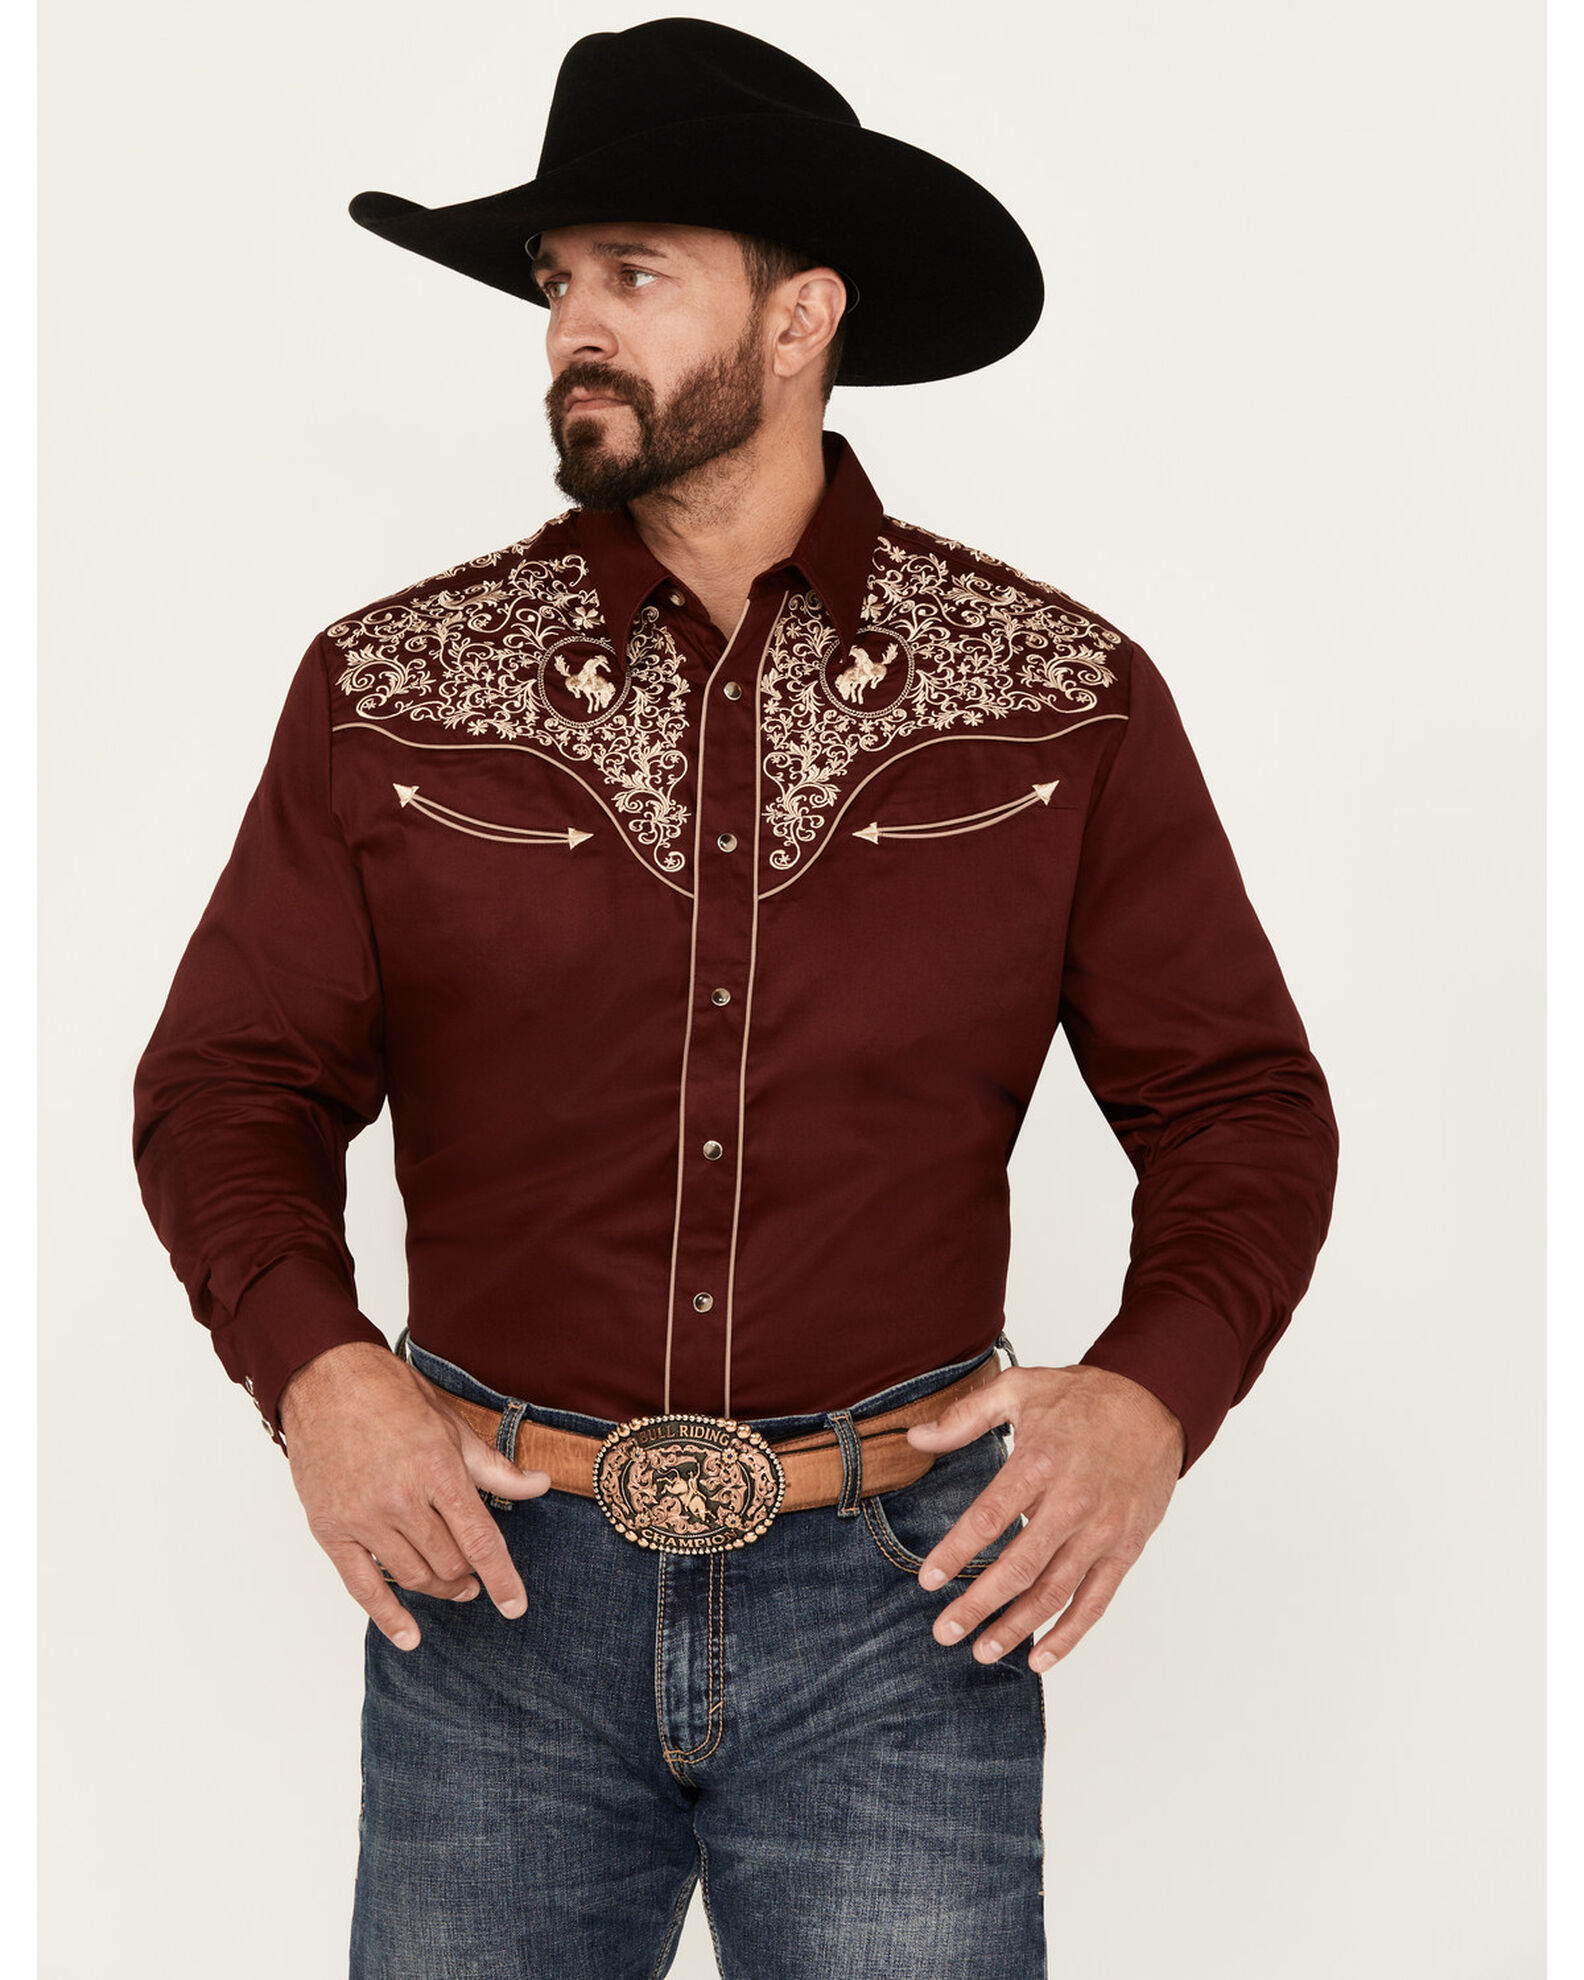 Rodeo Clothing Men's Embroidered Long Sleeve Snap Western Shirt